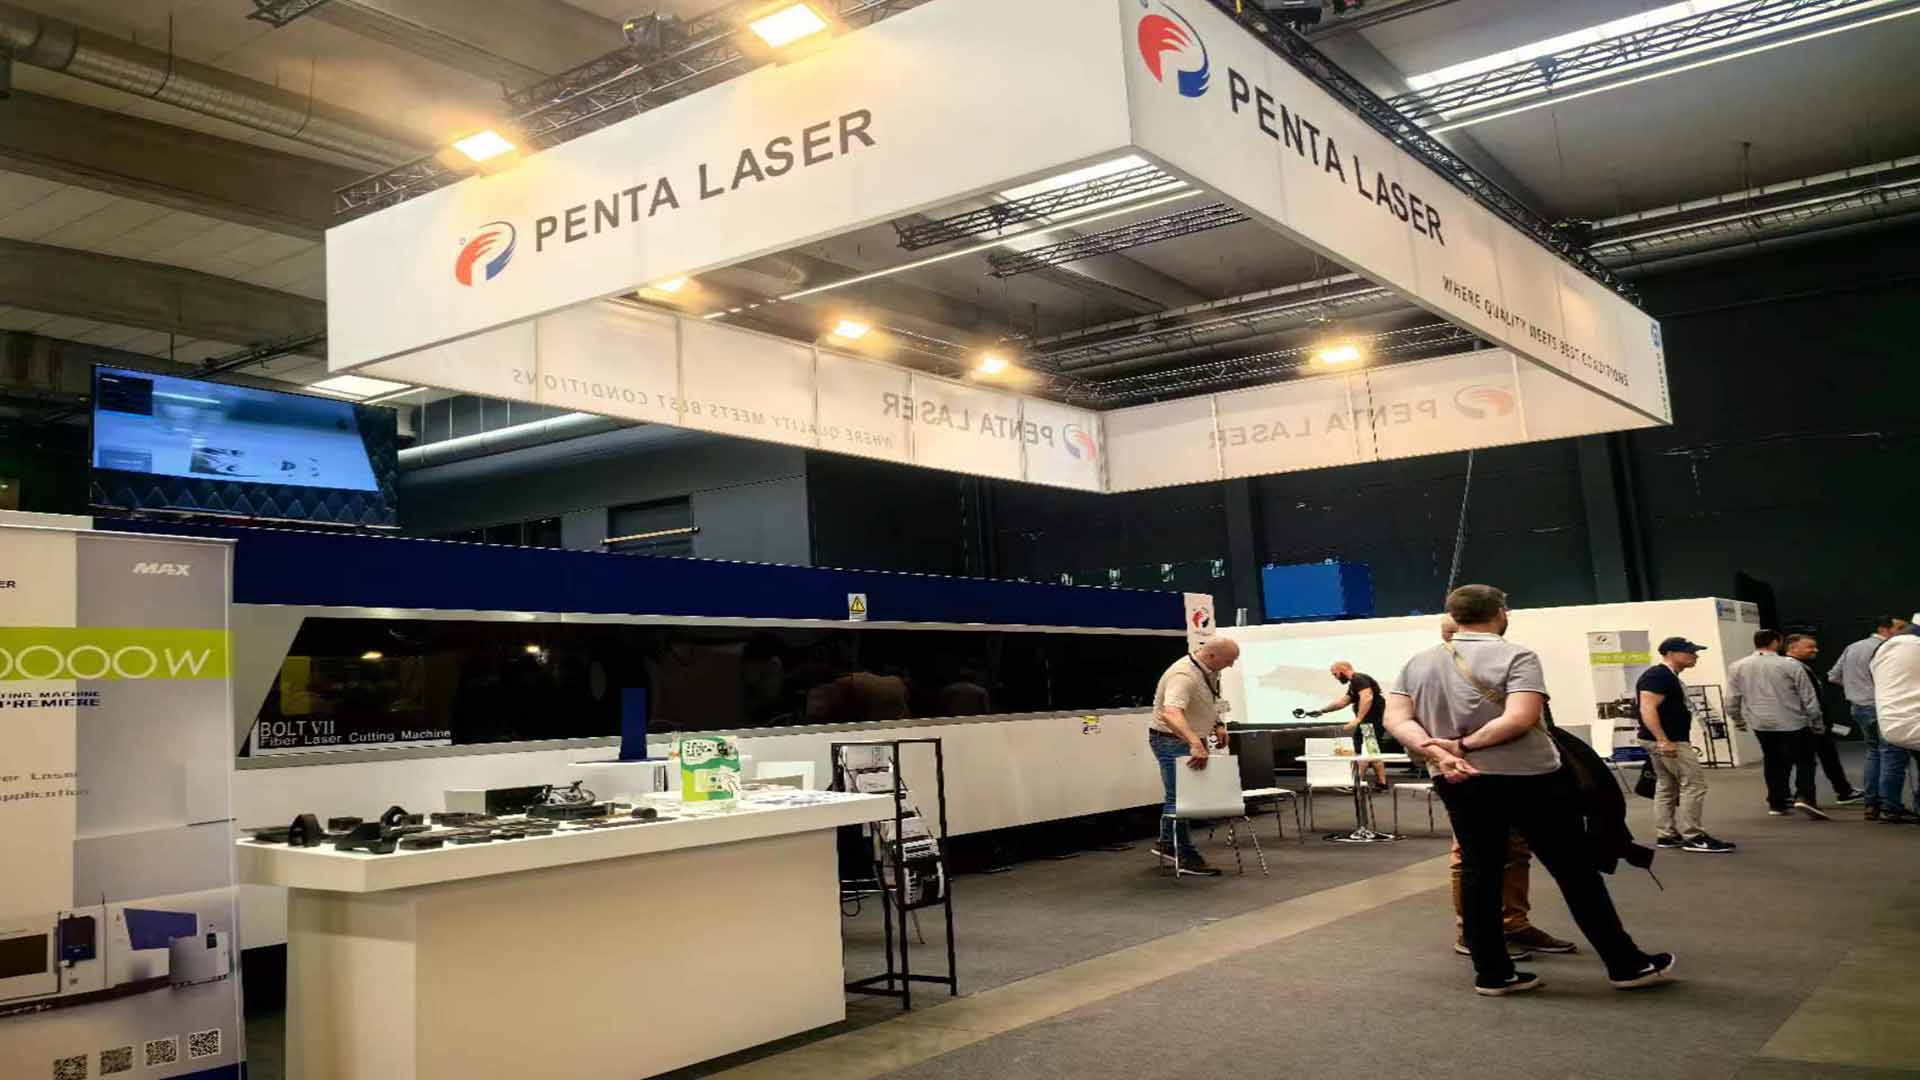 Belgium and Thailand work together at dual exhibitions, Penta Laser BOLT 7 series attracts global attention